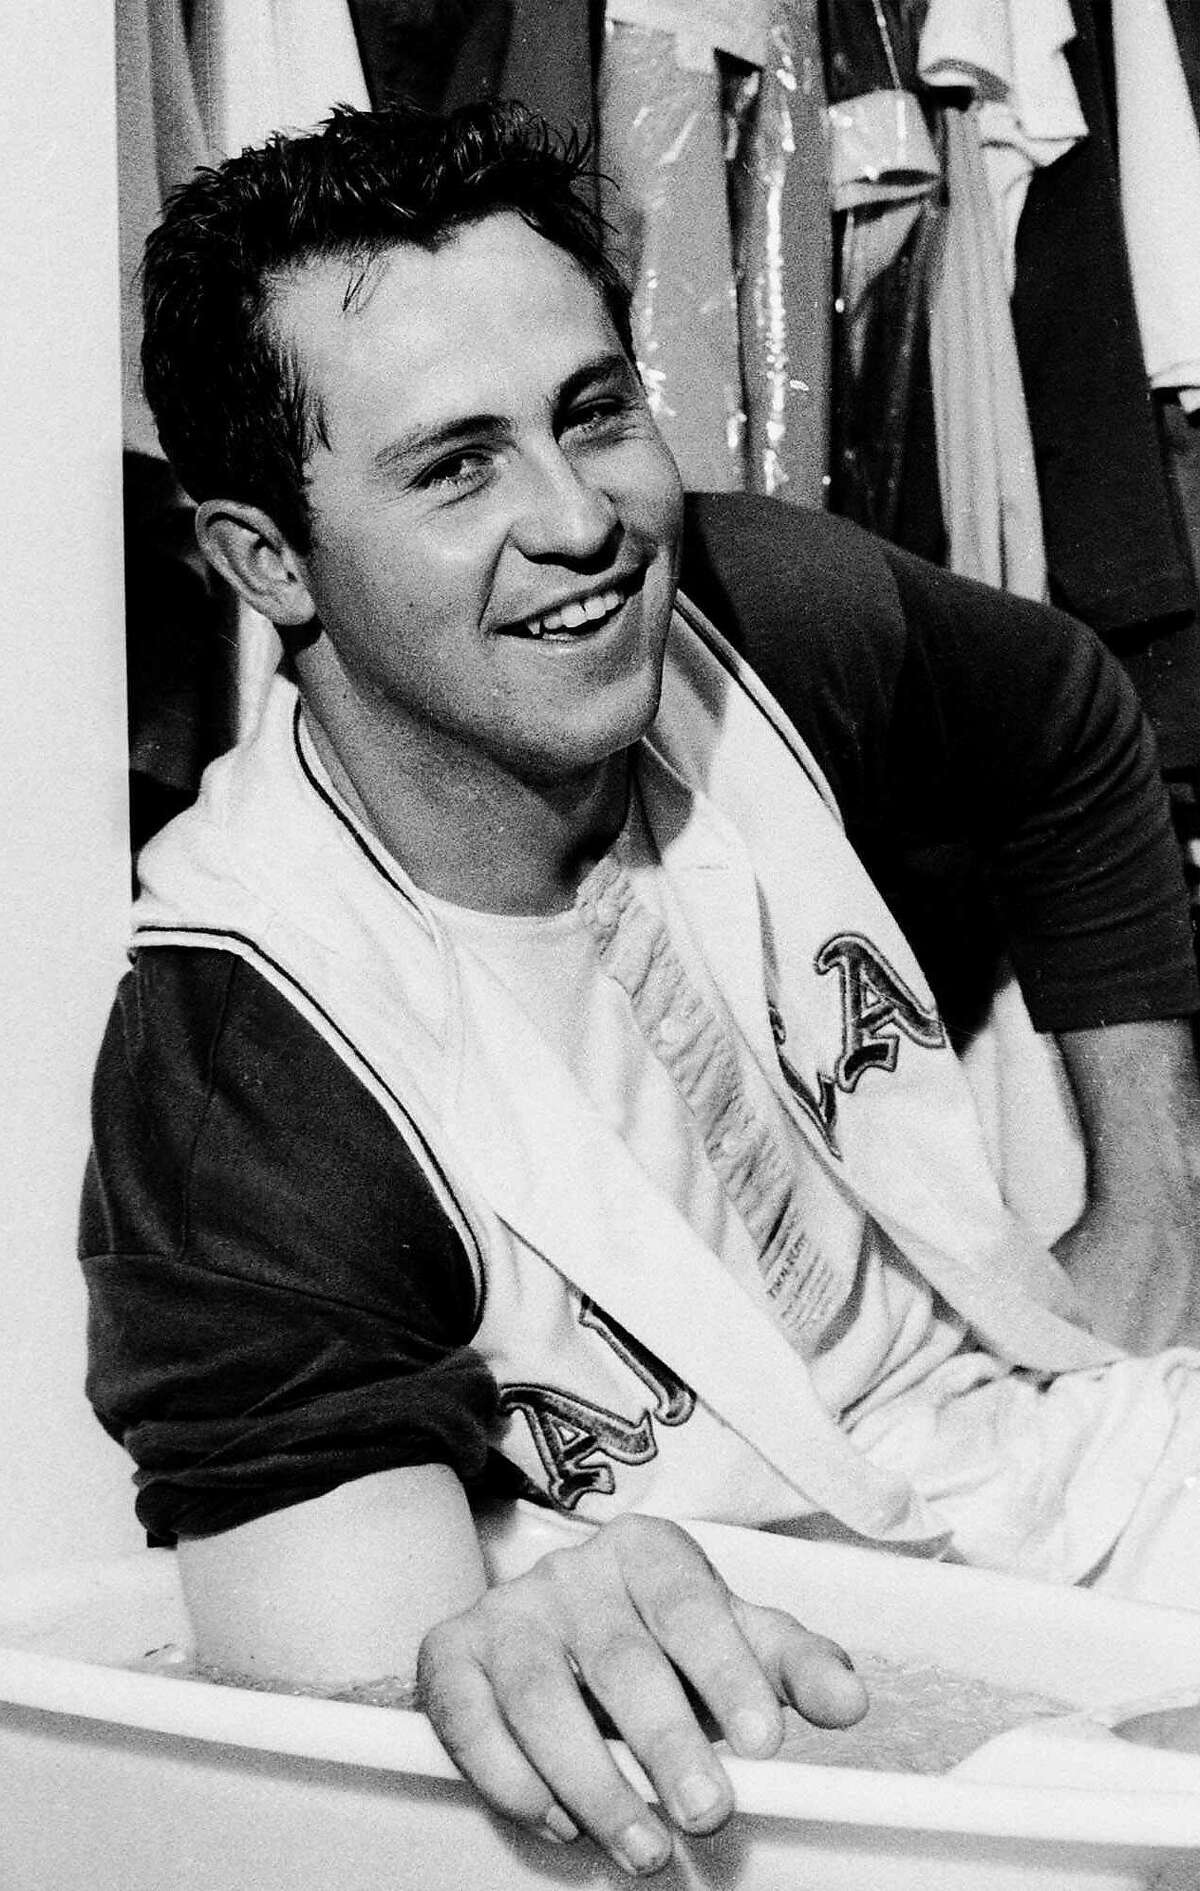 FILE--Jim 'Catfish' Hunter is all smiles as he soaks his pitching arm in ice water and talks with reporters after pitching a perfect game against the Minnesota Twins, in this May 8, 1968 in Oakland, Calif. Thirty-one years ago today, Hunter pitched a perfect game _ one of just 13 perfect games in Major League baseball history. Surrounded by former teammates and hometown family and friends, Hunter marked another milestone, the first fundraiser to aid those, like him, diagnosed with Lou Gehrig's disease.(AP Photo/FILE)